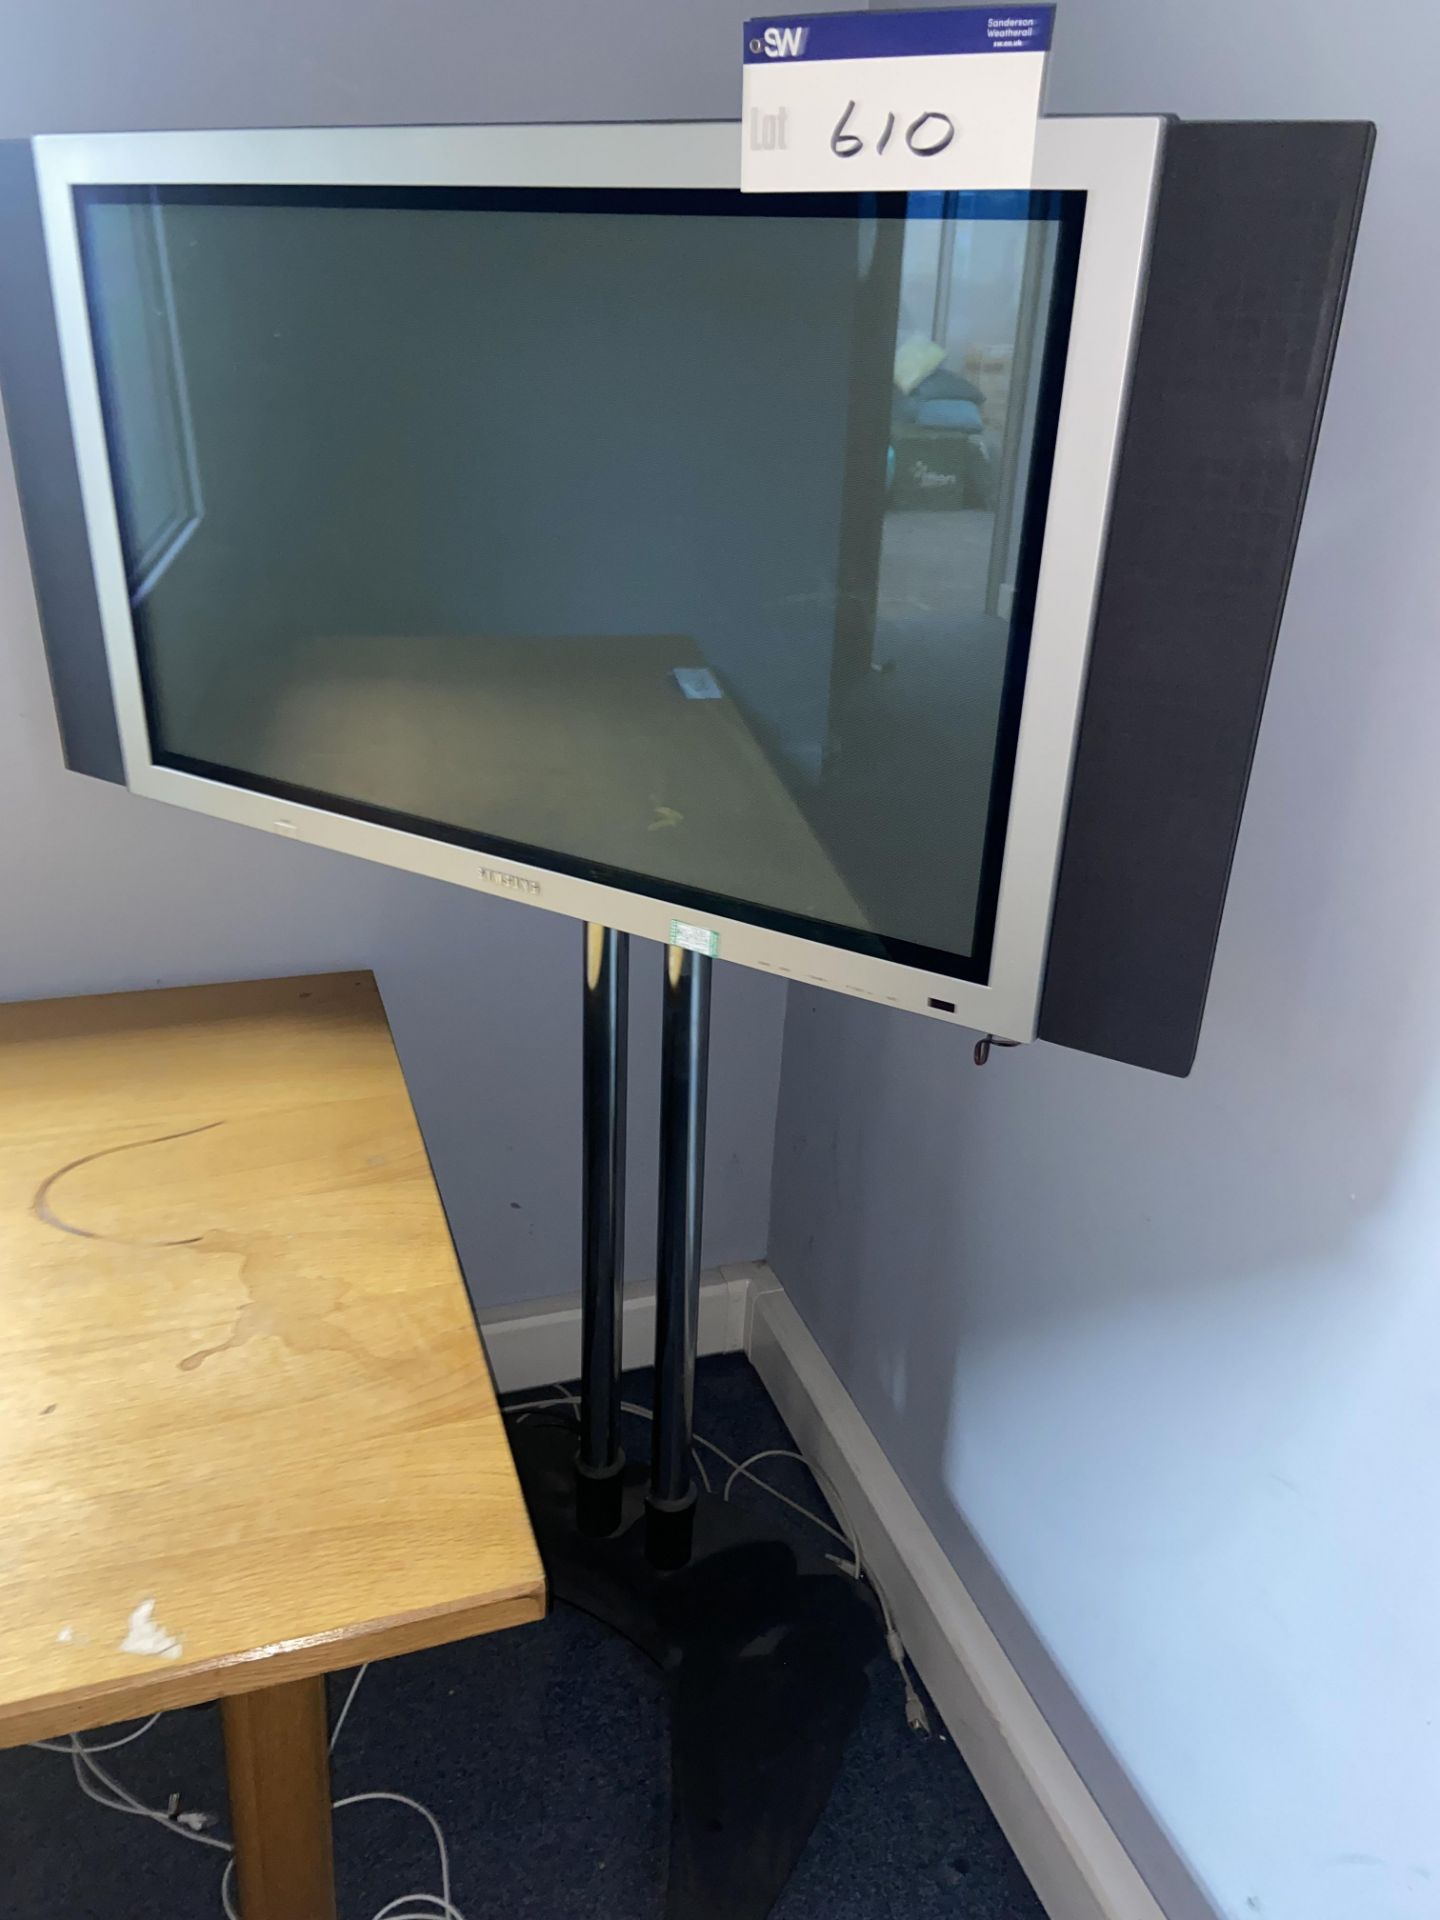 Samsung 42in. Flat Screen Television, with TV mounting stand (no remote control) Please read the